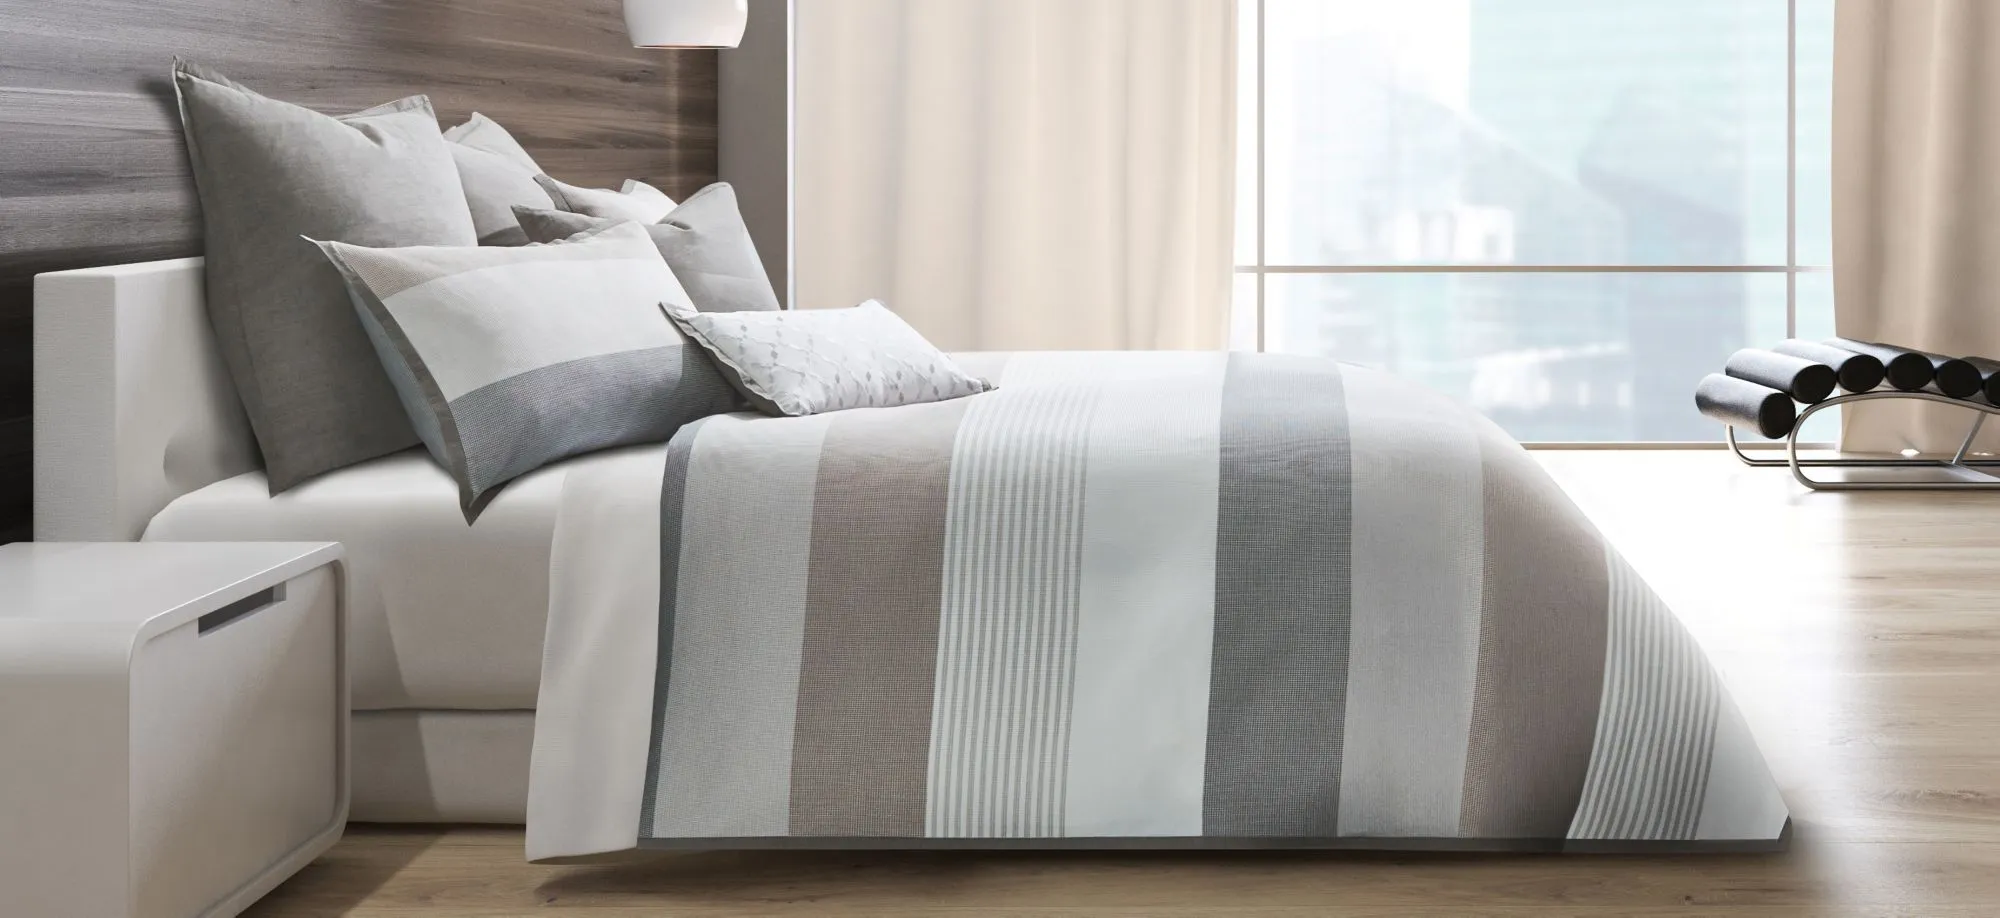 Ultra 7-Piece Duvet Set in Gray, Silver by Amini Innovation